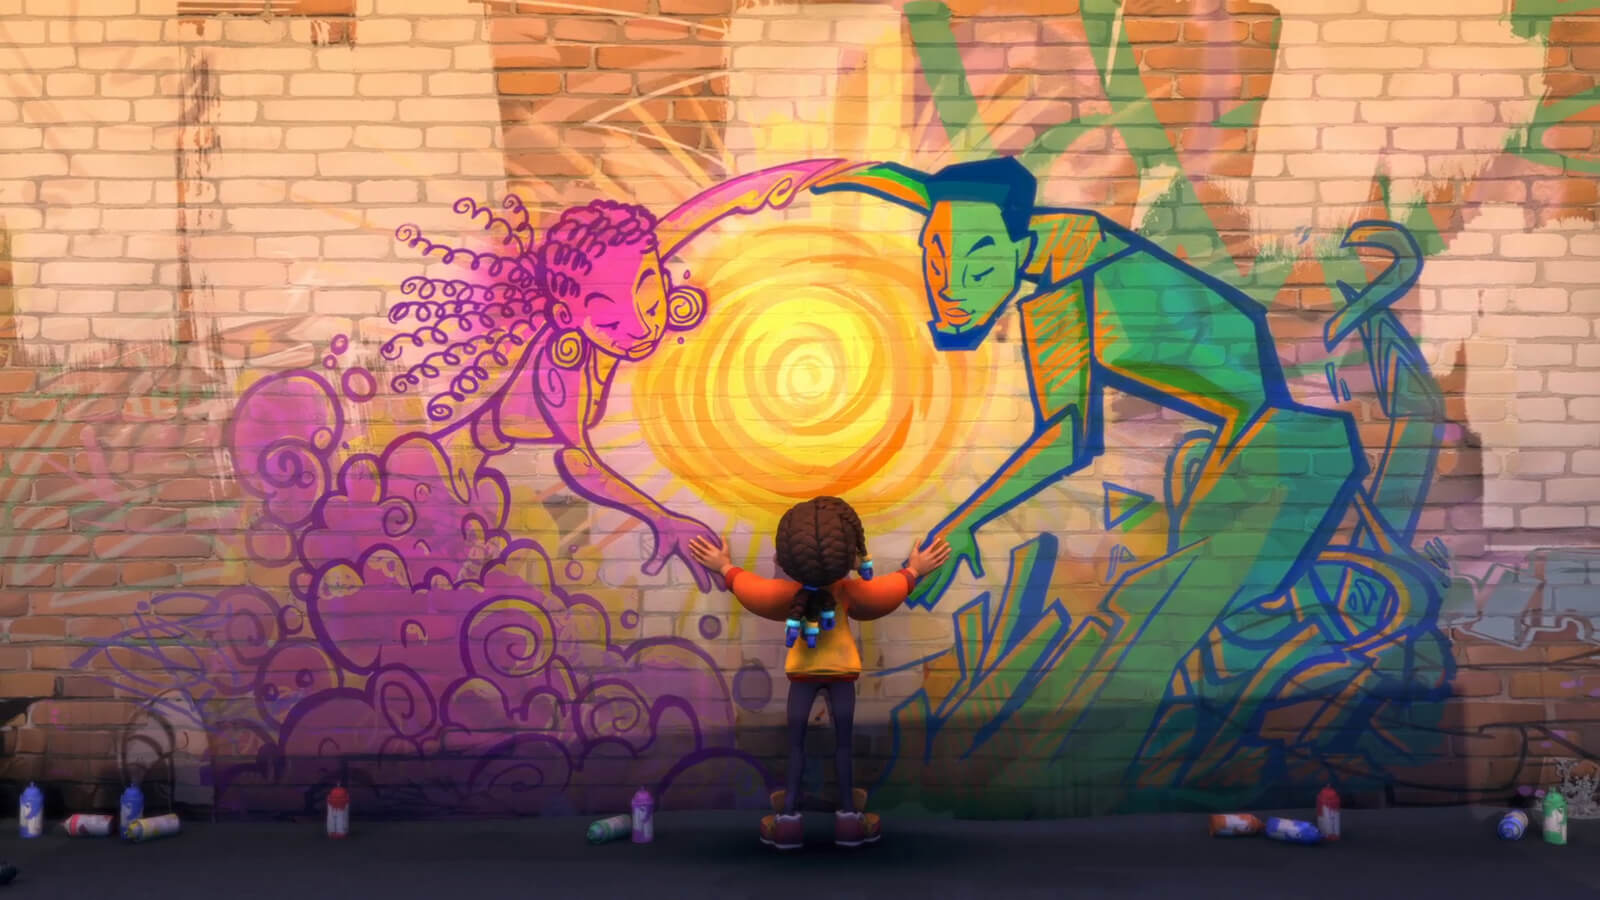 A girl facing a brick wall spray-painted with two figures, one pink, one green, holding hands around a bright sun